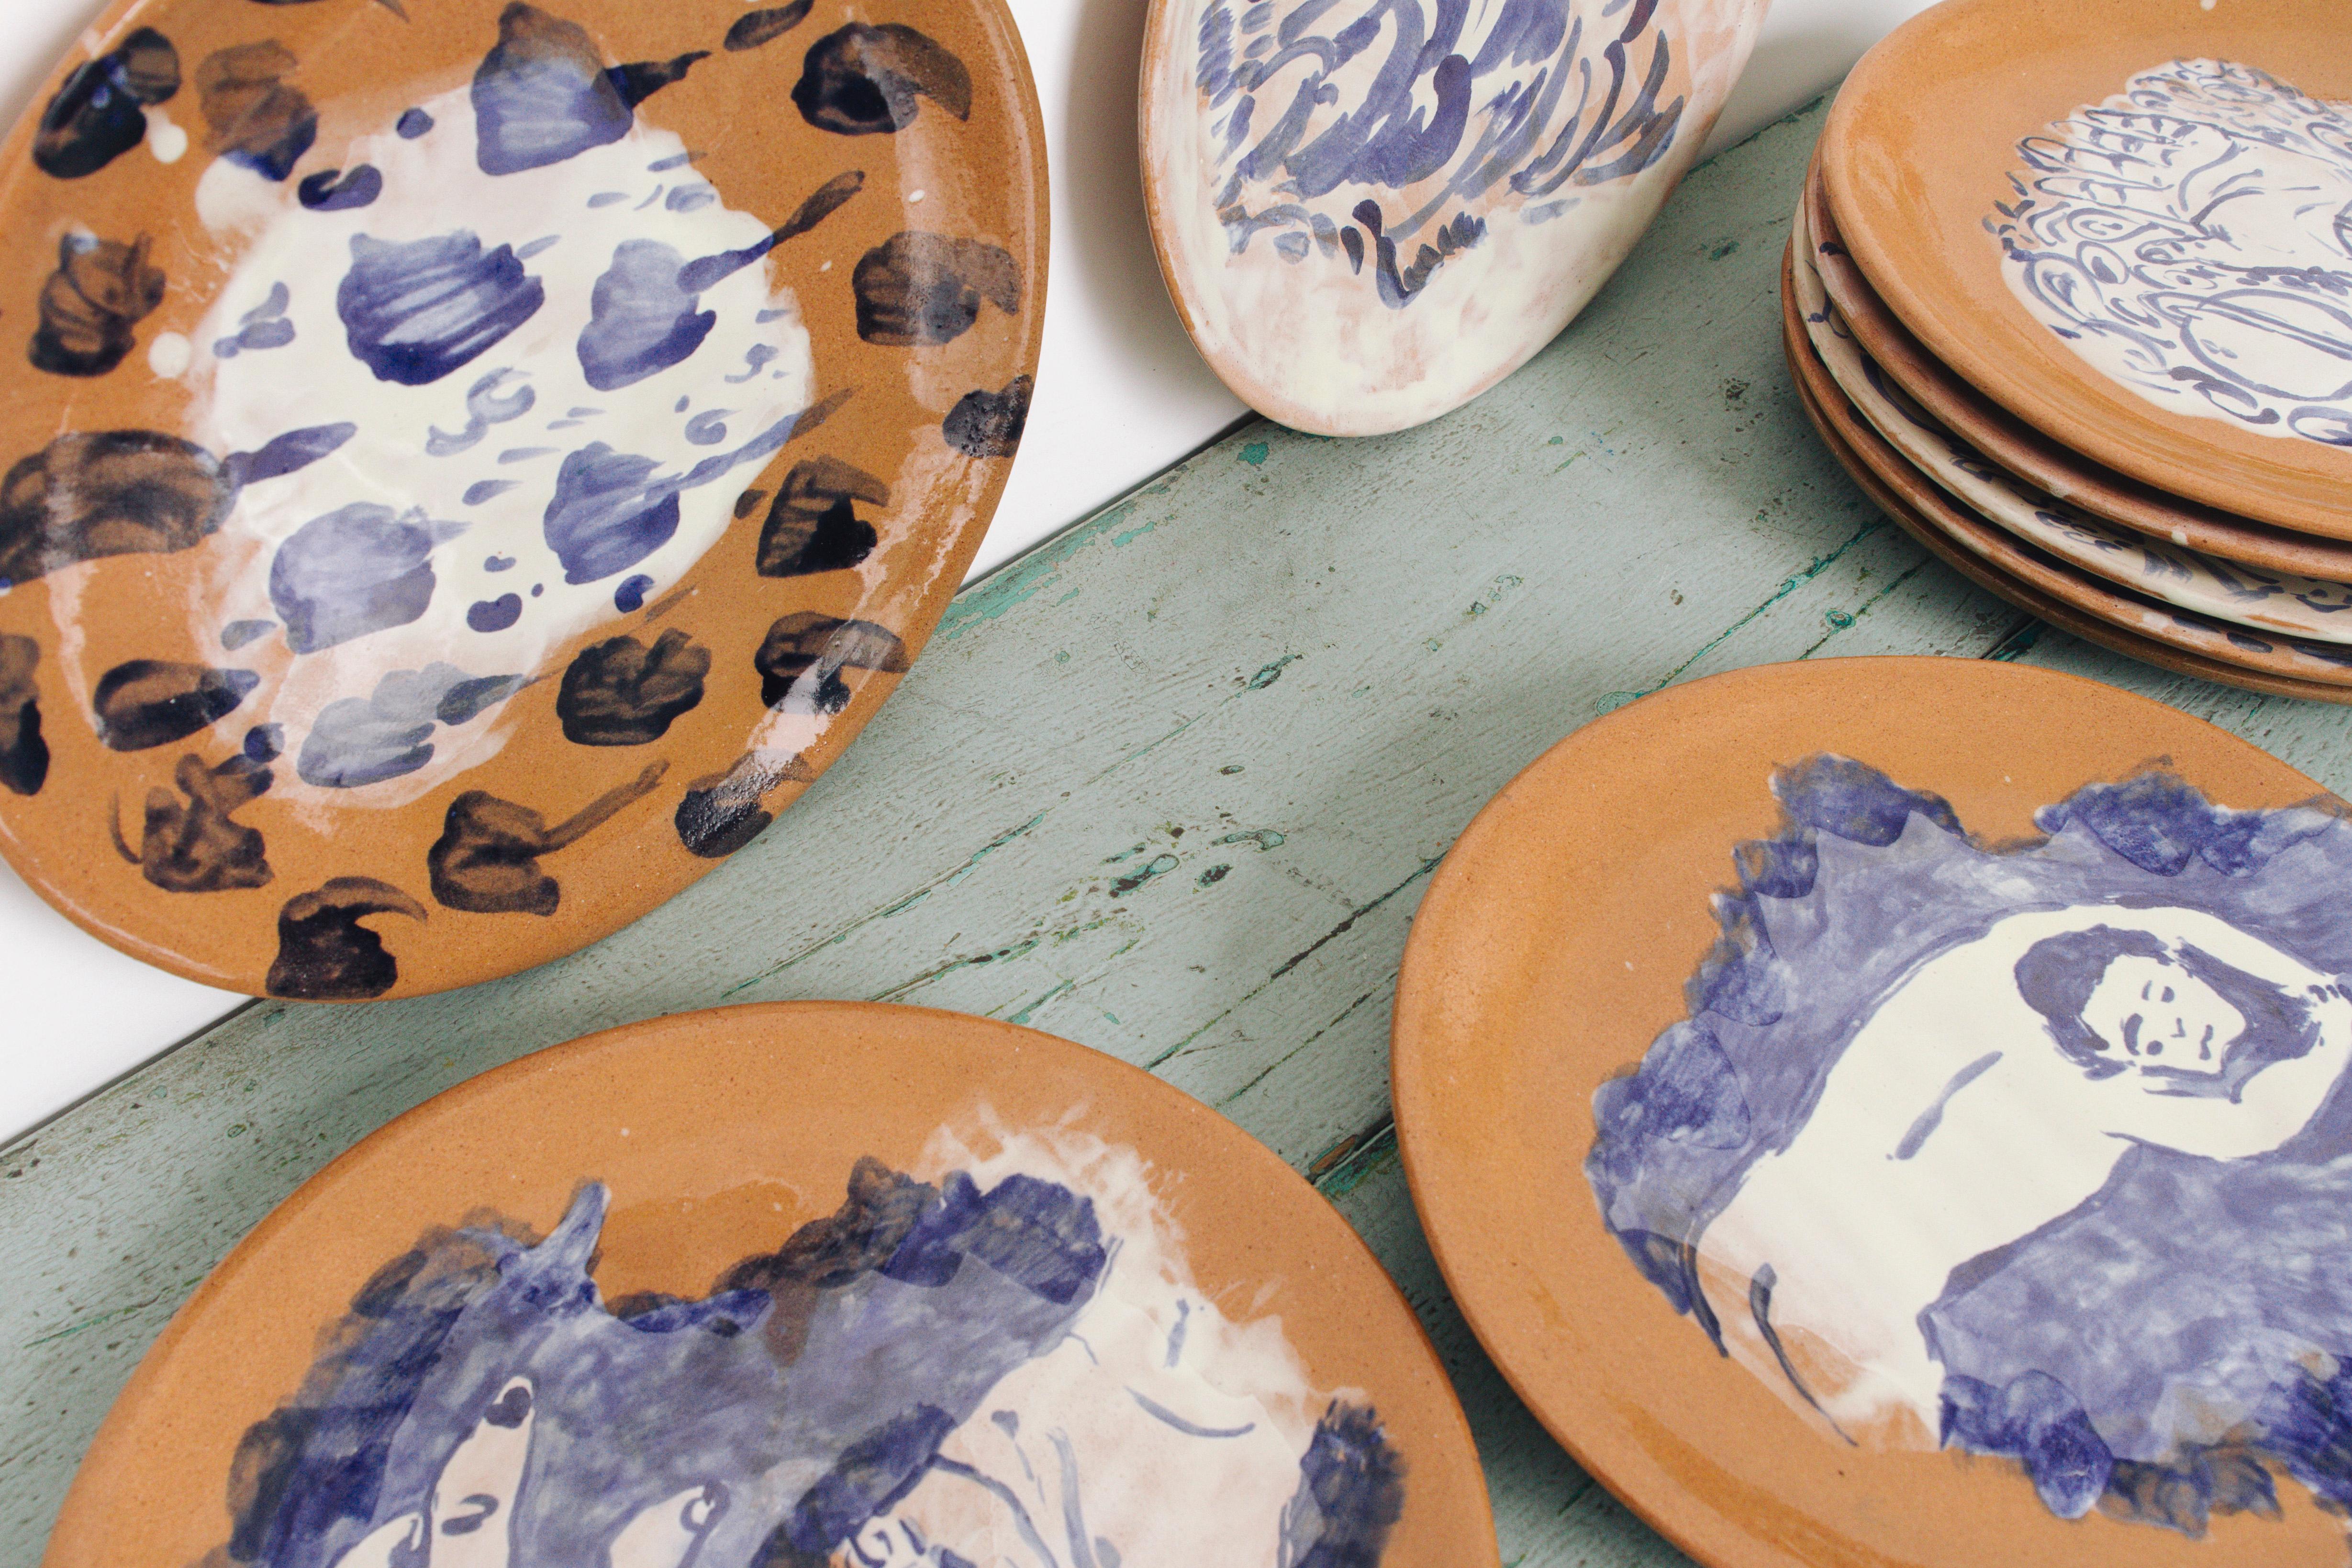 This Majolica ceramic plate collection was designed by Mexican sculptor, painter, and ceramist Lorenzo Lorenzzo — made in his studio, in the colonial town of San Miguel de Allende, in the state of Guanajuato, Mexico. For this limited edition